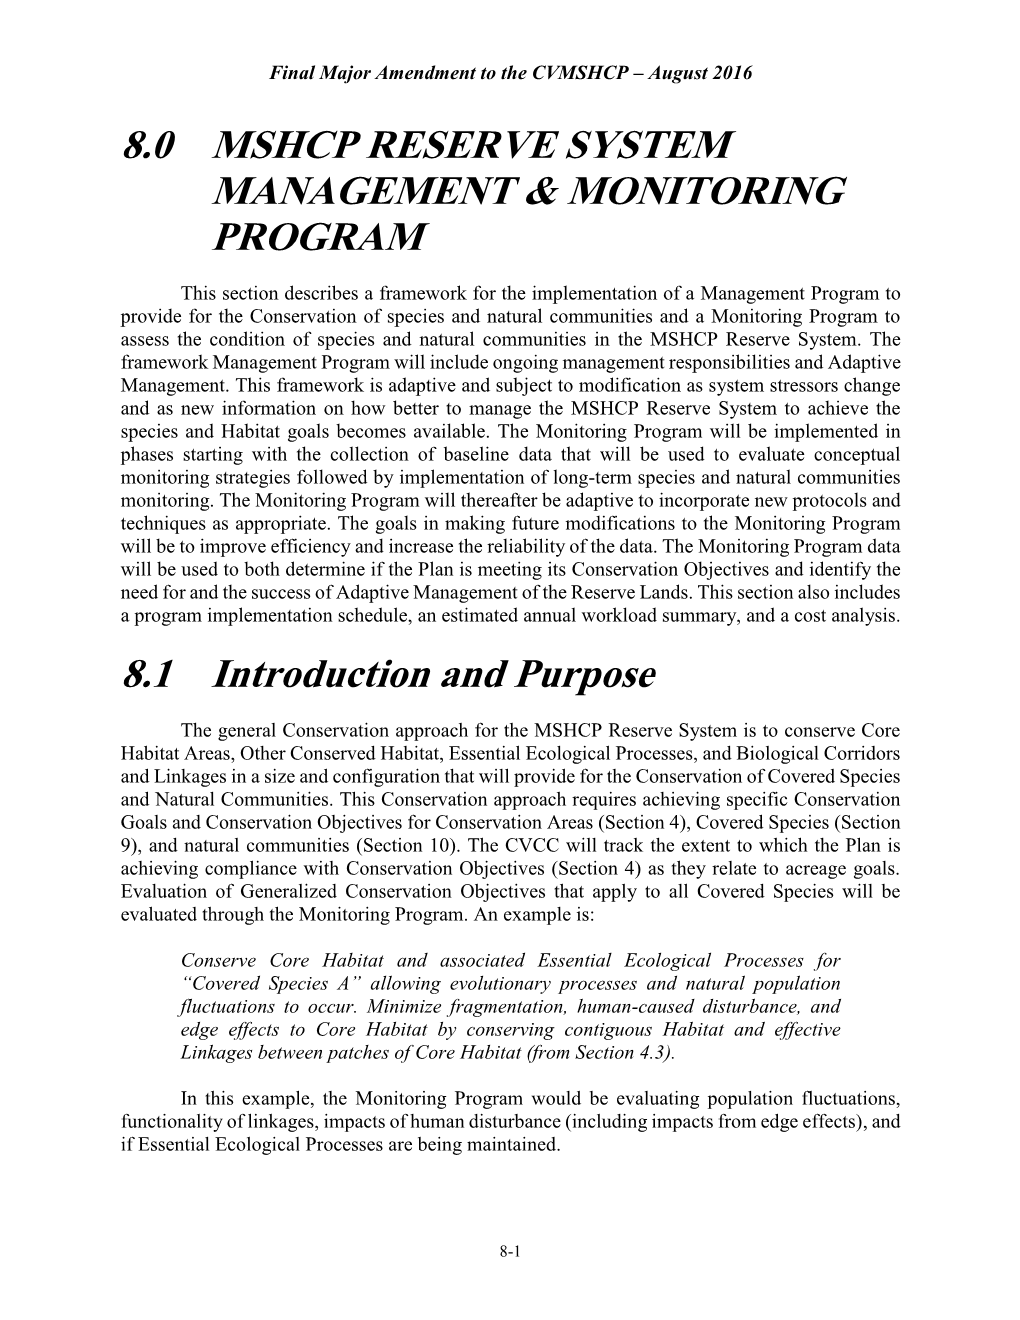 Section 8.0 MSHCP Reserve System Management and Monitoring Program